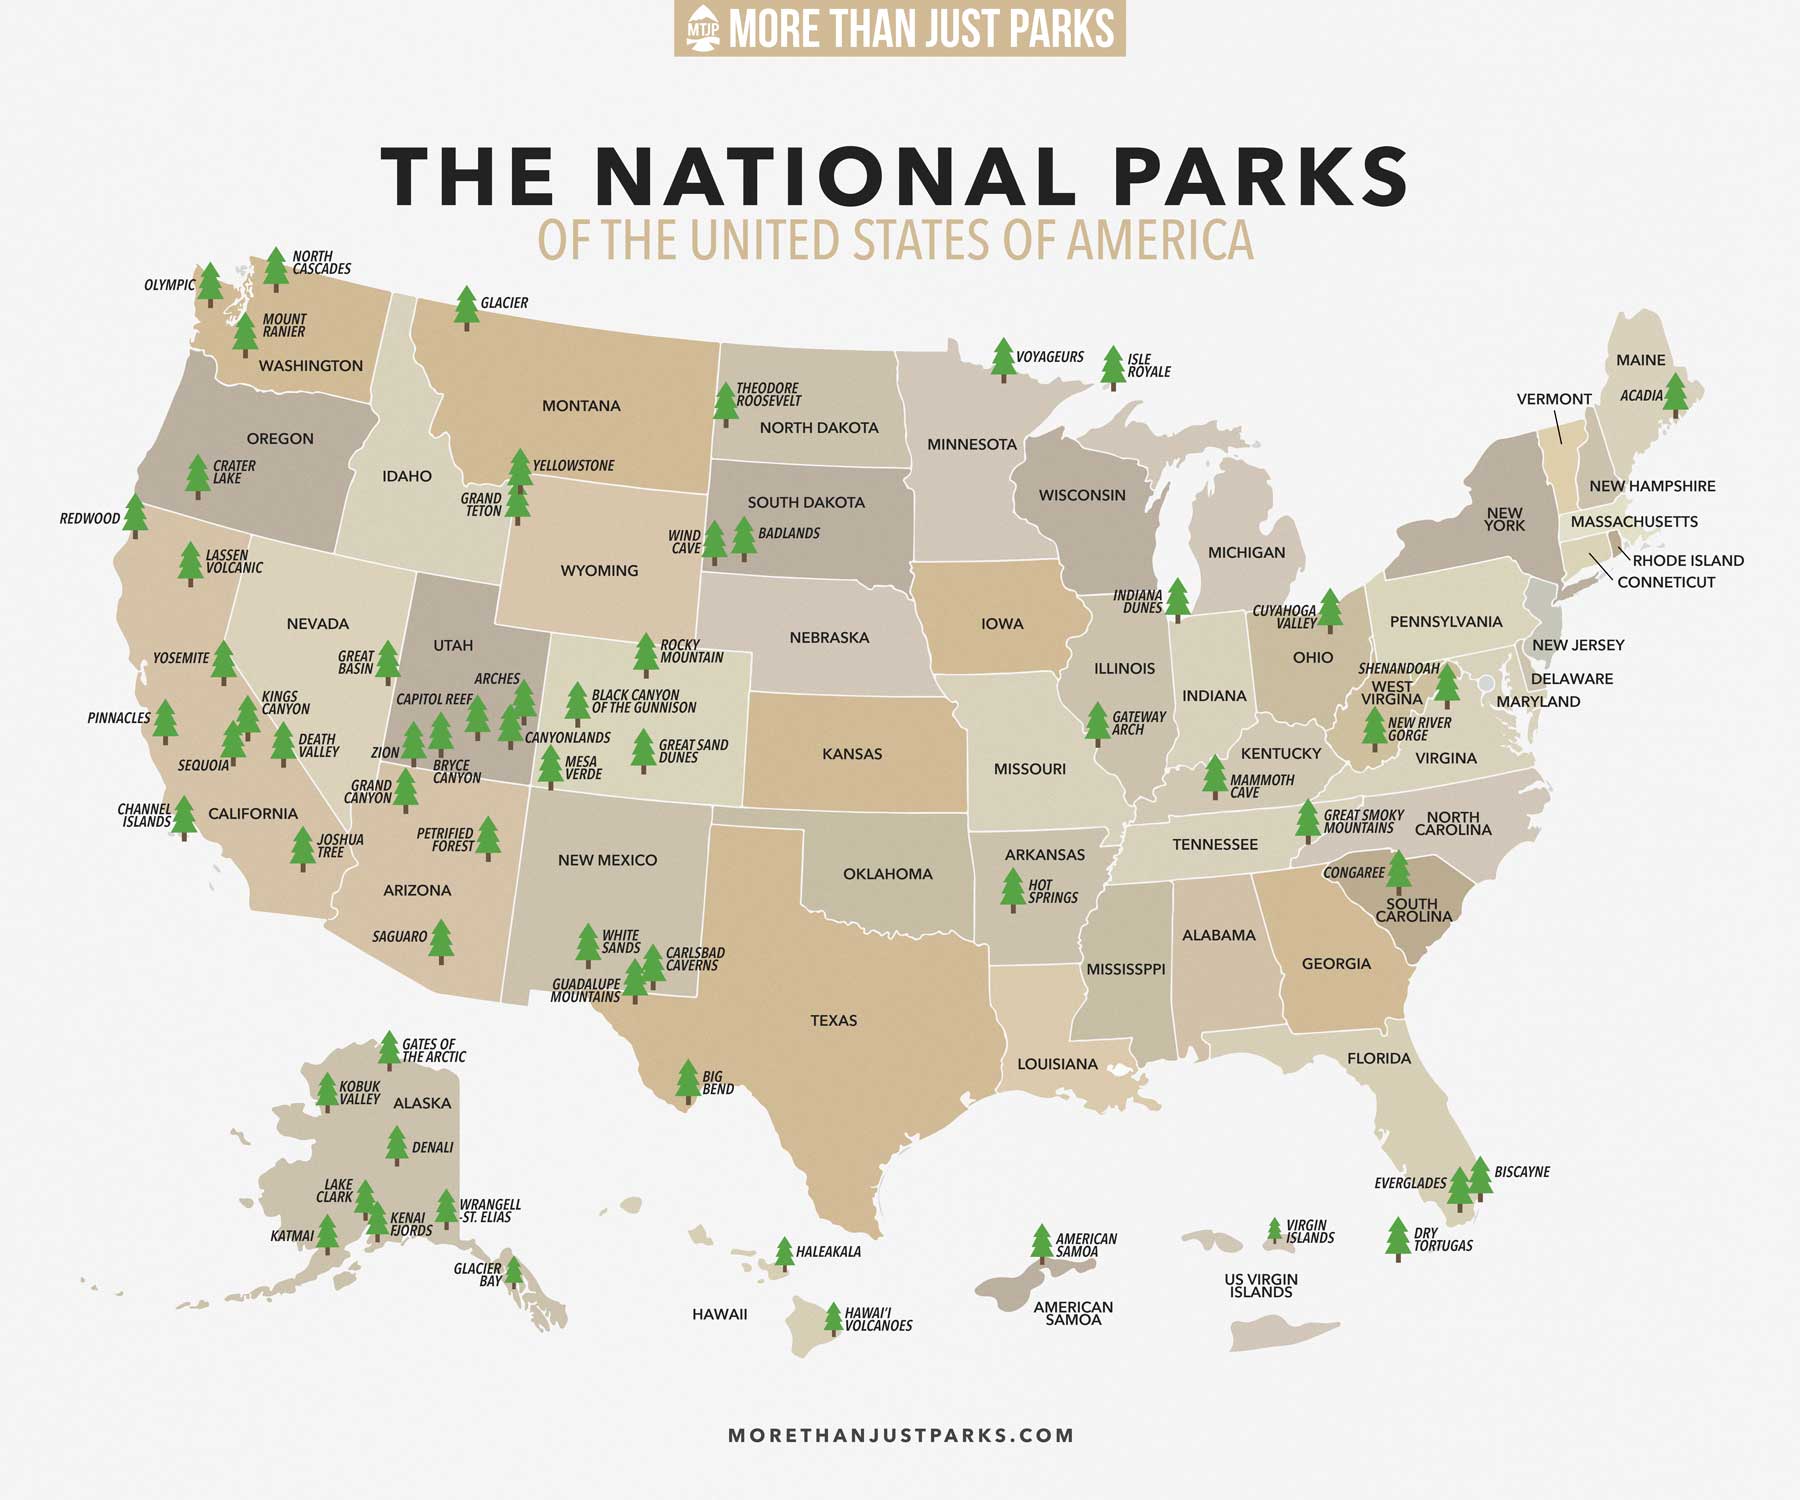 least visited national parks, least crowded national parks